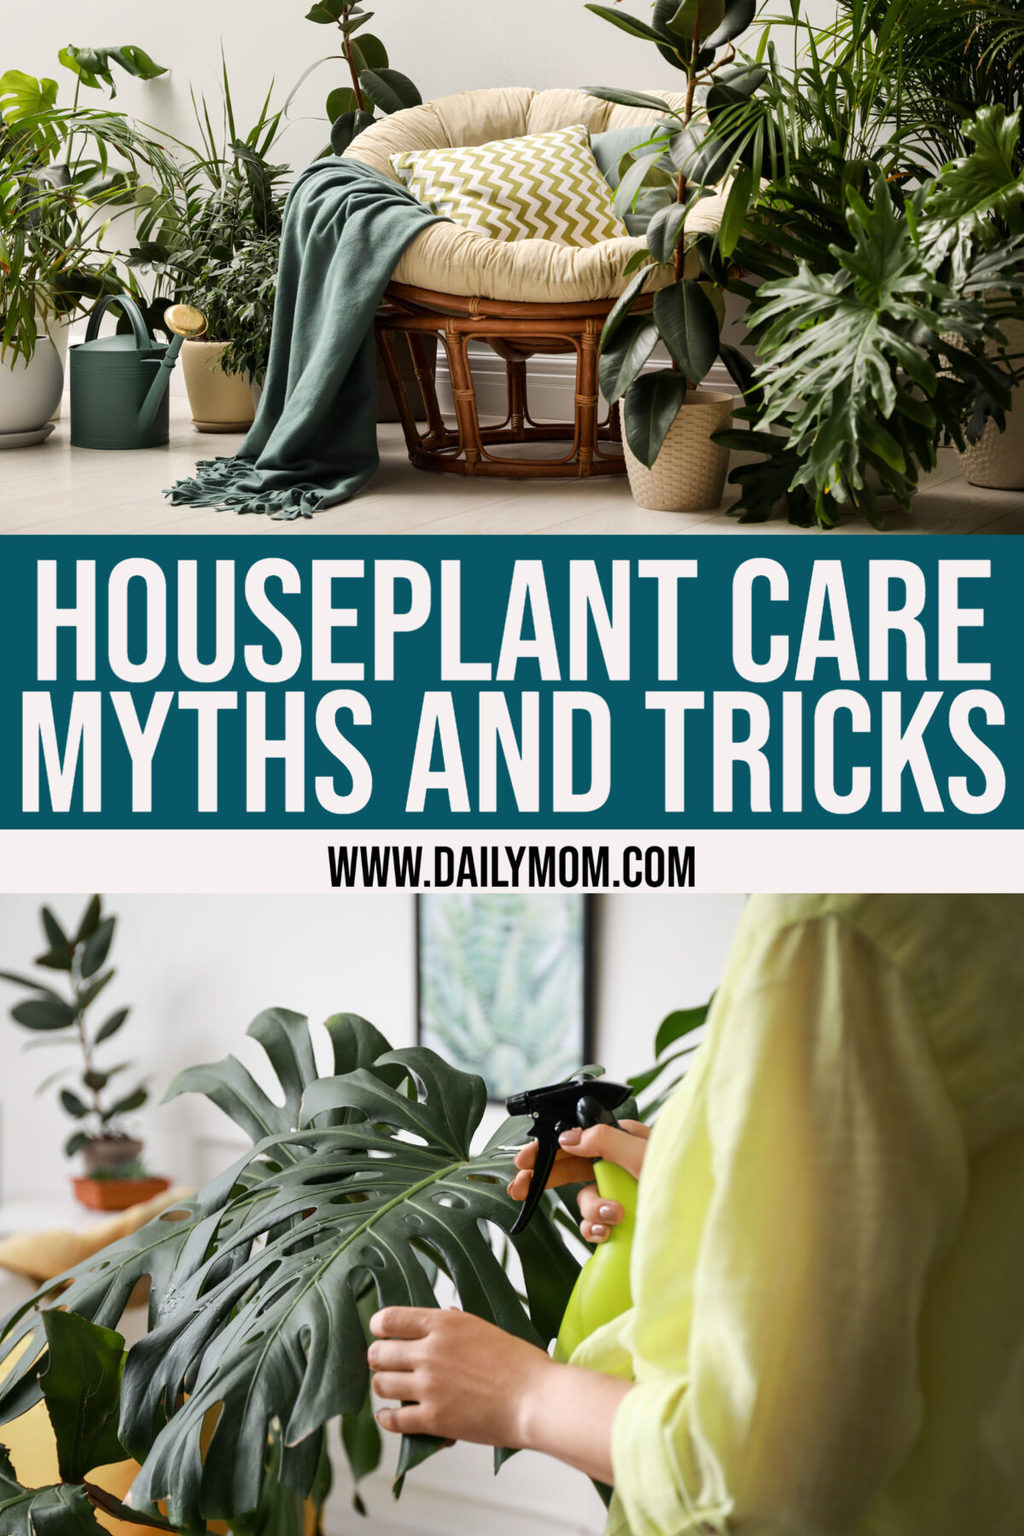 7 Plant Care Myths And Tricks: Green Thumb Trend